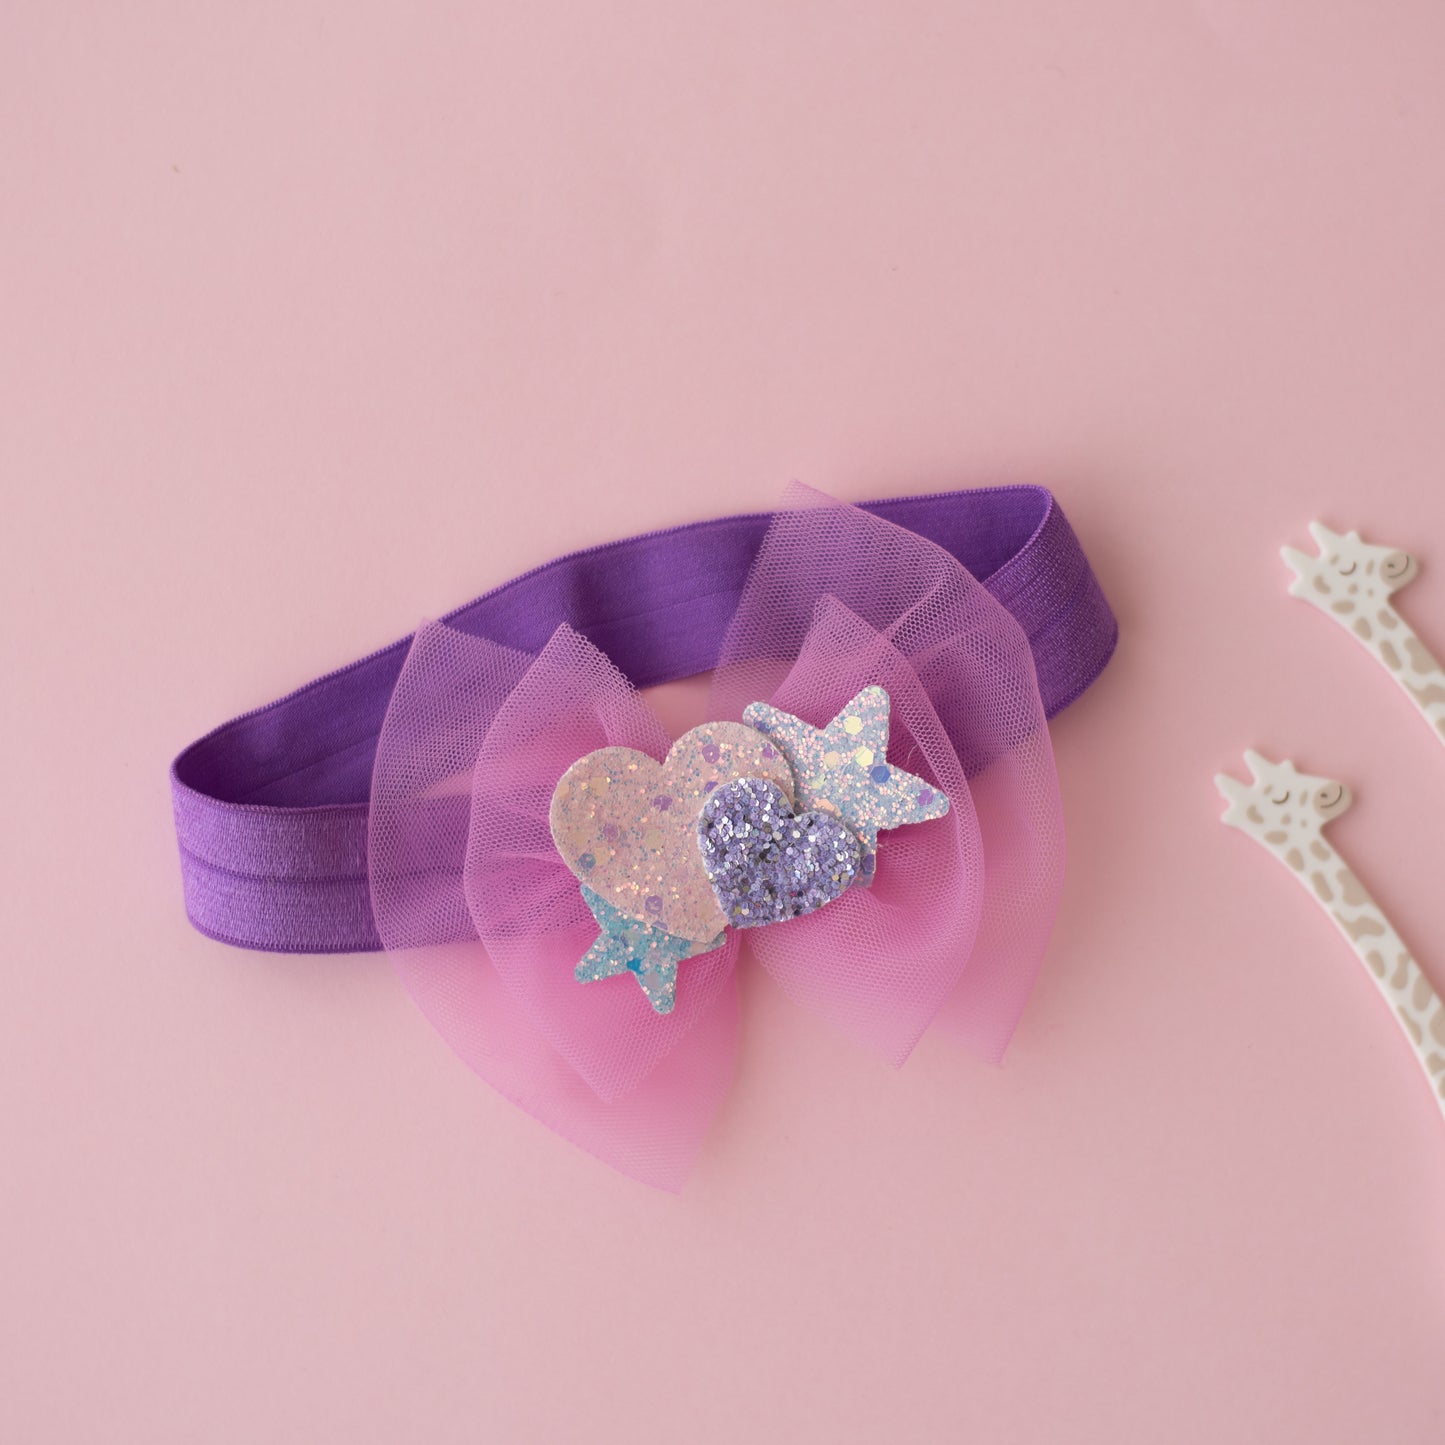 Soft net bow on super soft infant stretchy bands with glitter stars and heats - Purple